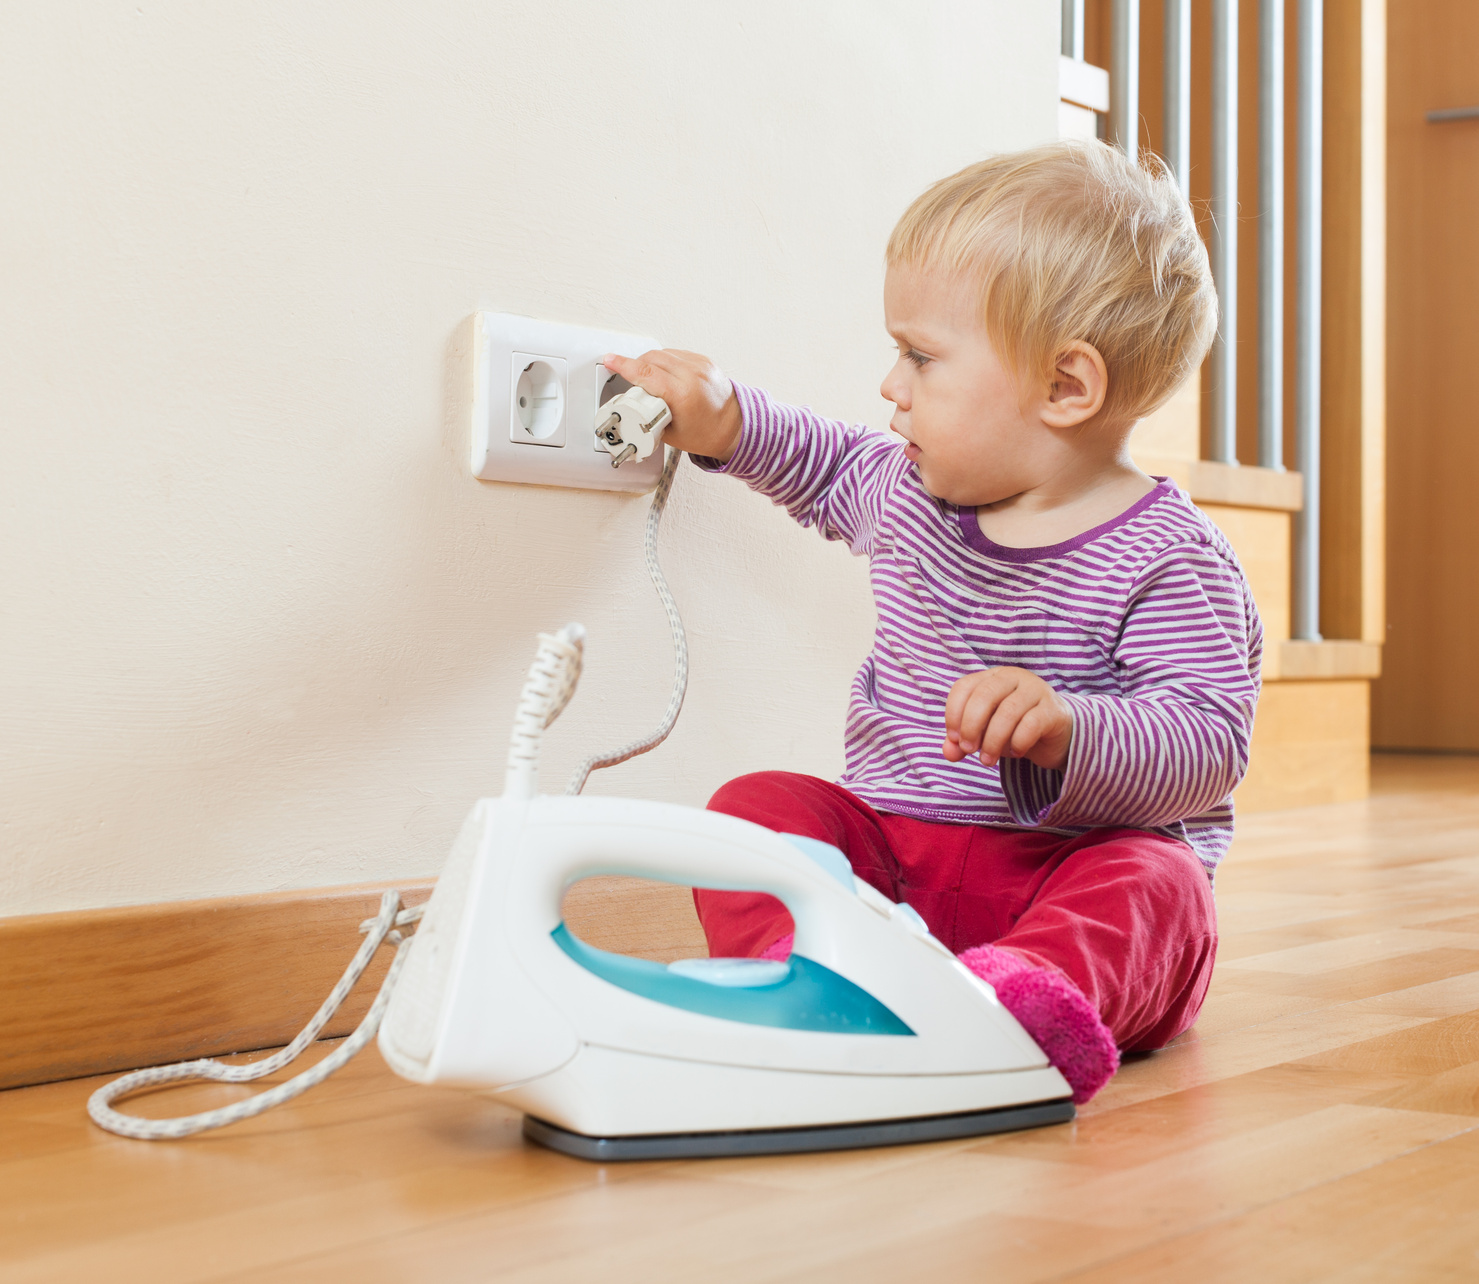 Toddler  playing with electric iron at home